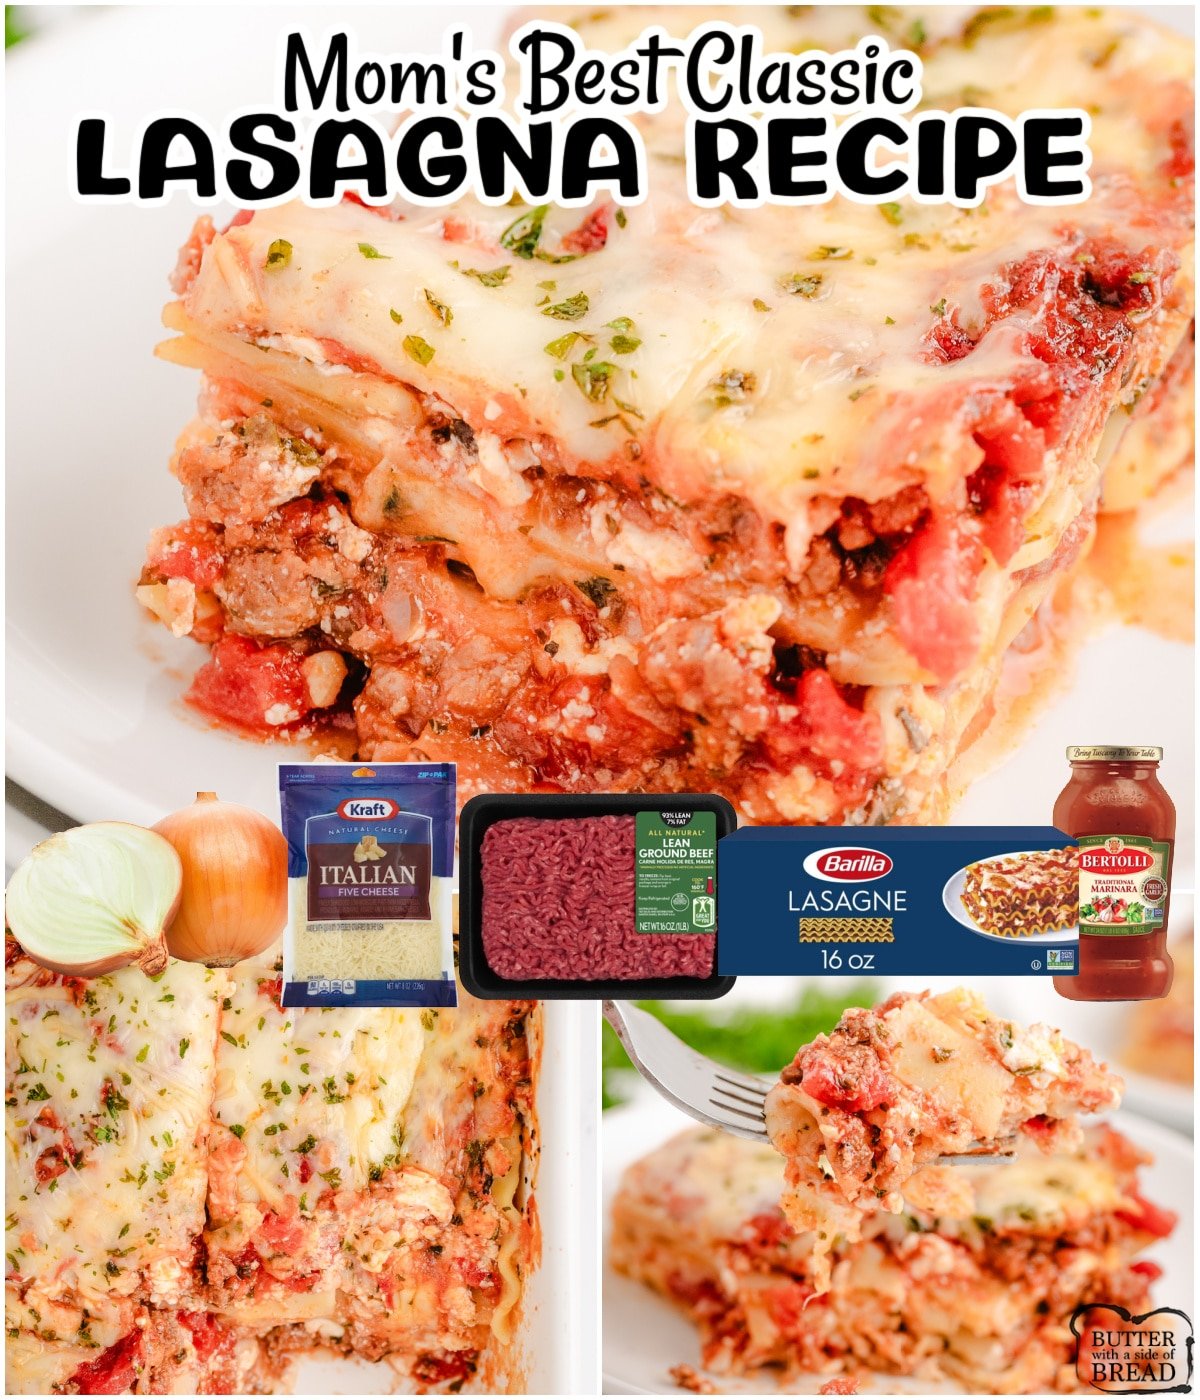 Easy Homemade Lasagna made with classic ingredients for a cheesy, flavorful pasta dinner! Mom's best recipe made with ground beef, a blend of spices, cheeses & tomatoes layered & baked to perfection!